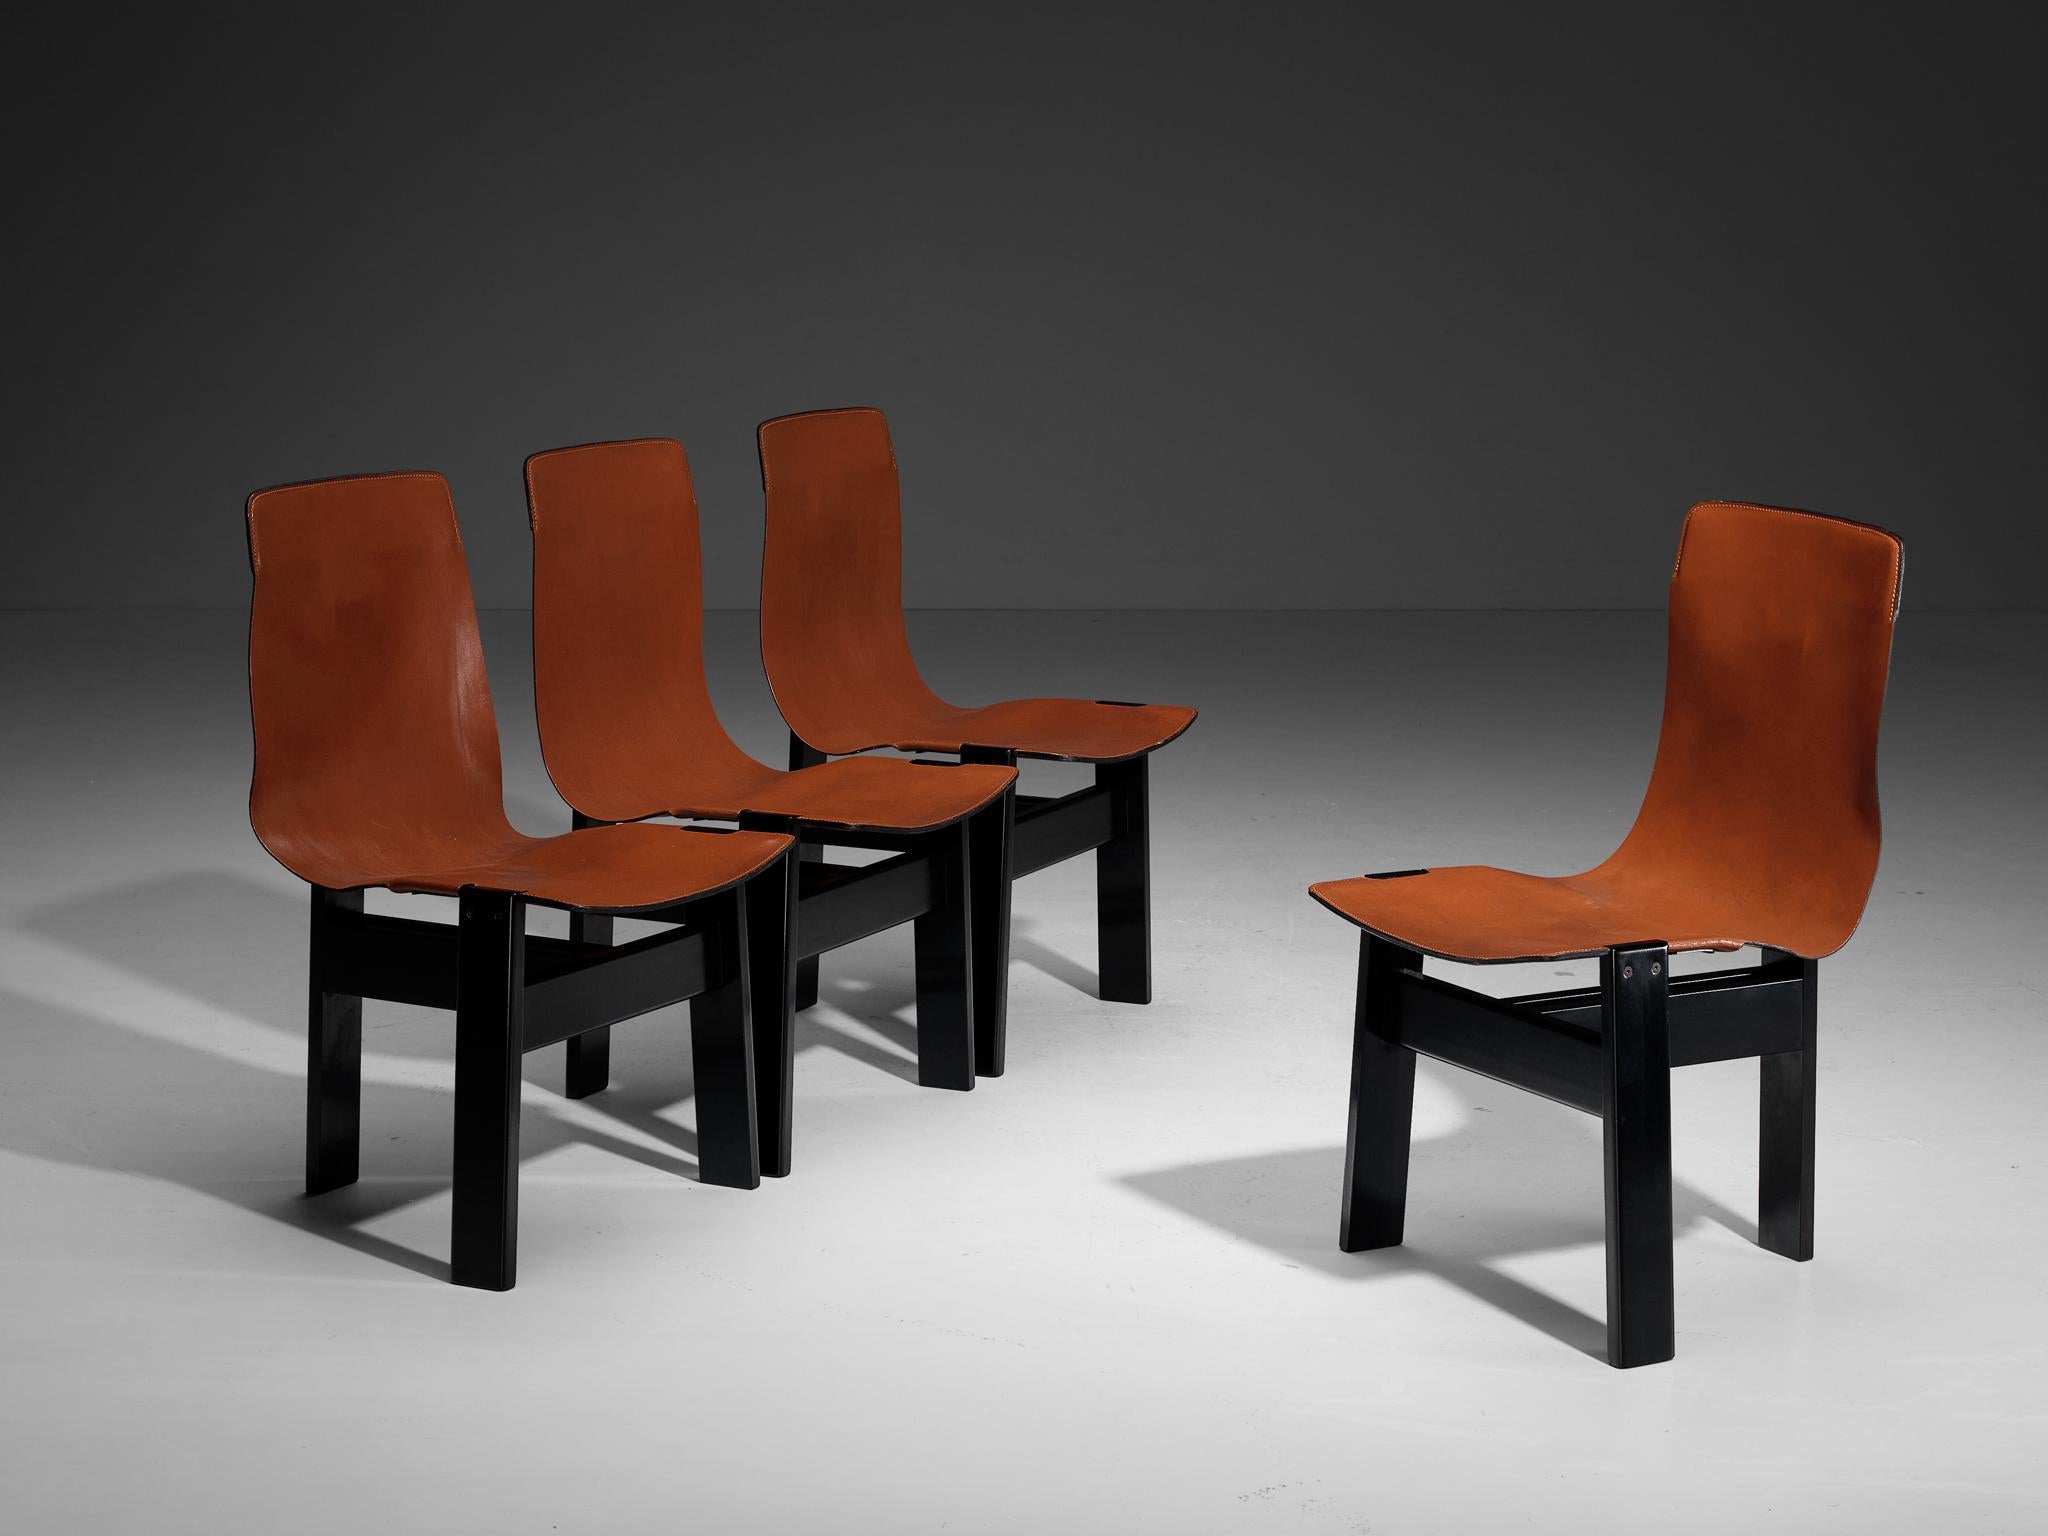 Angelo Mangiarotti for Skipper, set of four chairs, model 'Tre 3', black lacquered wood, saddle leather, Italy, 1978

Set of four 'Tre 3' dining chairs by the Italian designer Angelo Mangiarotti. The basic frame of these wonderful chairs consist of